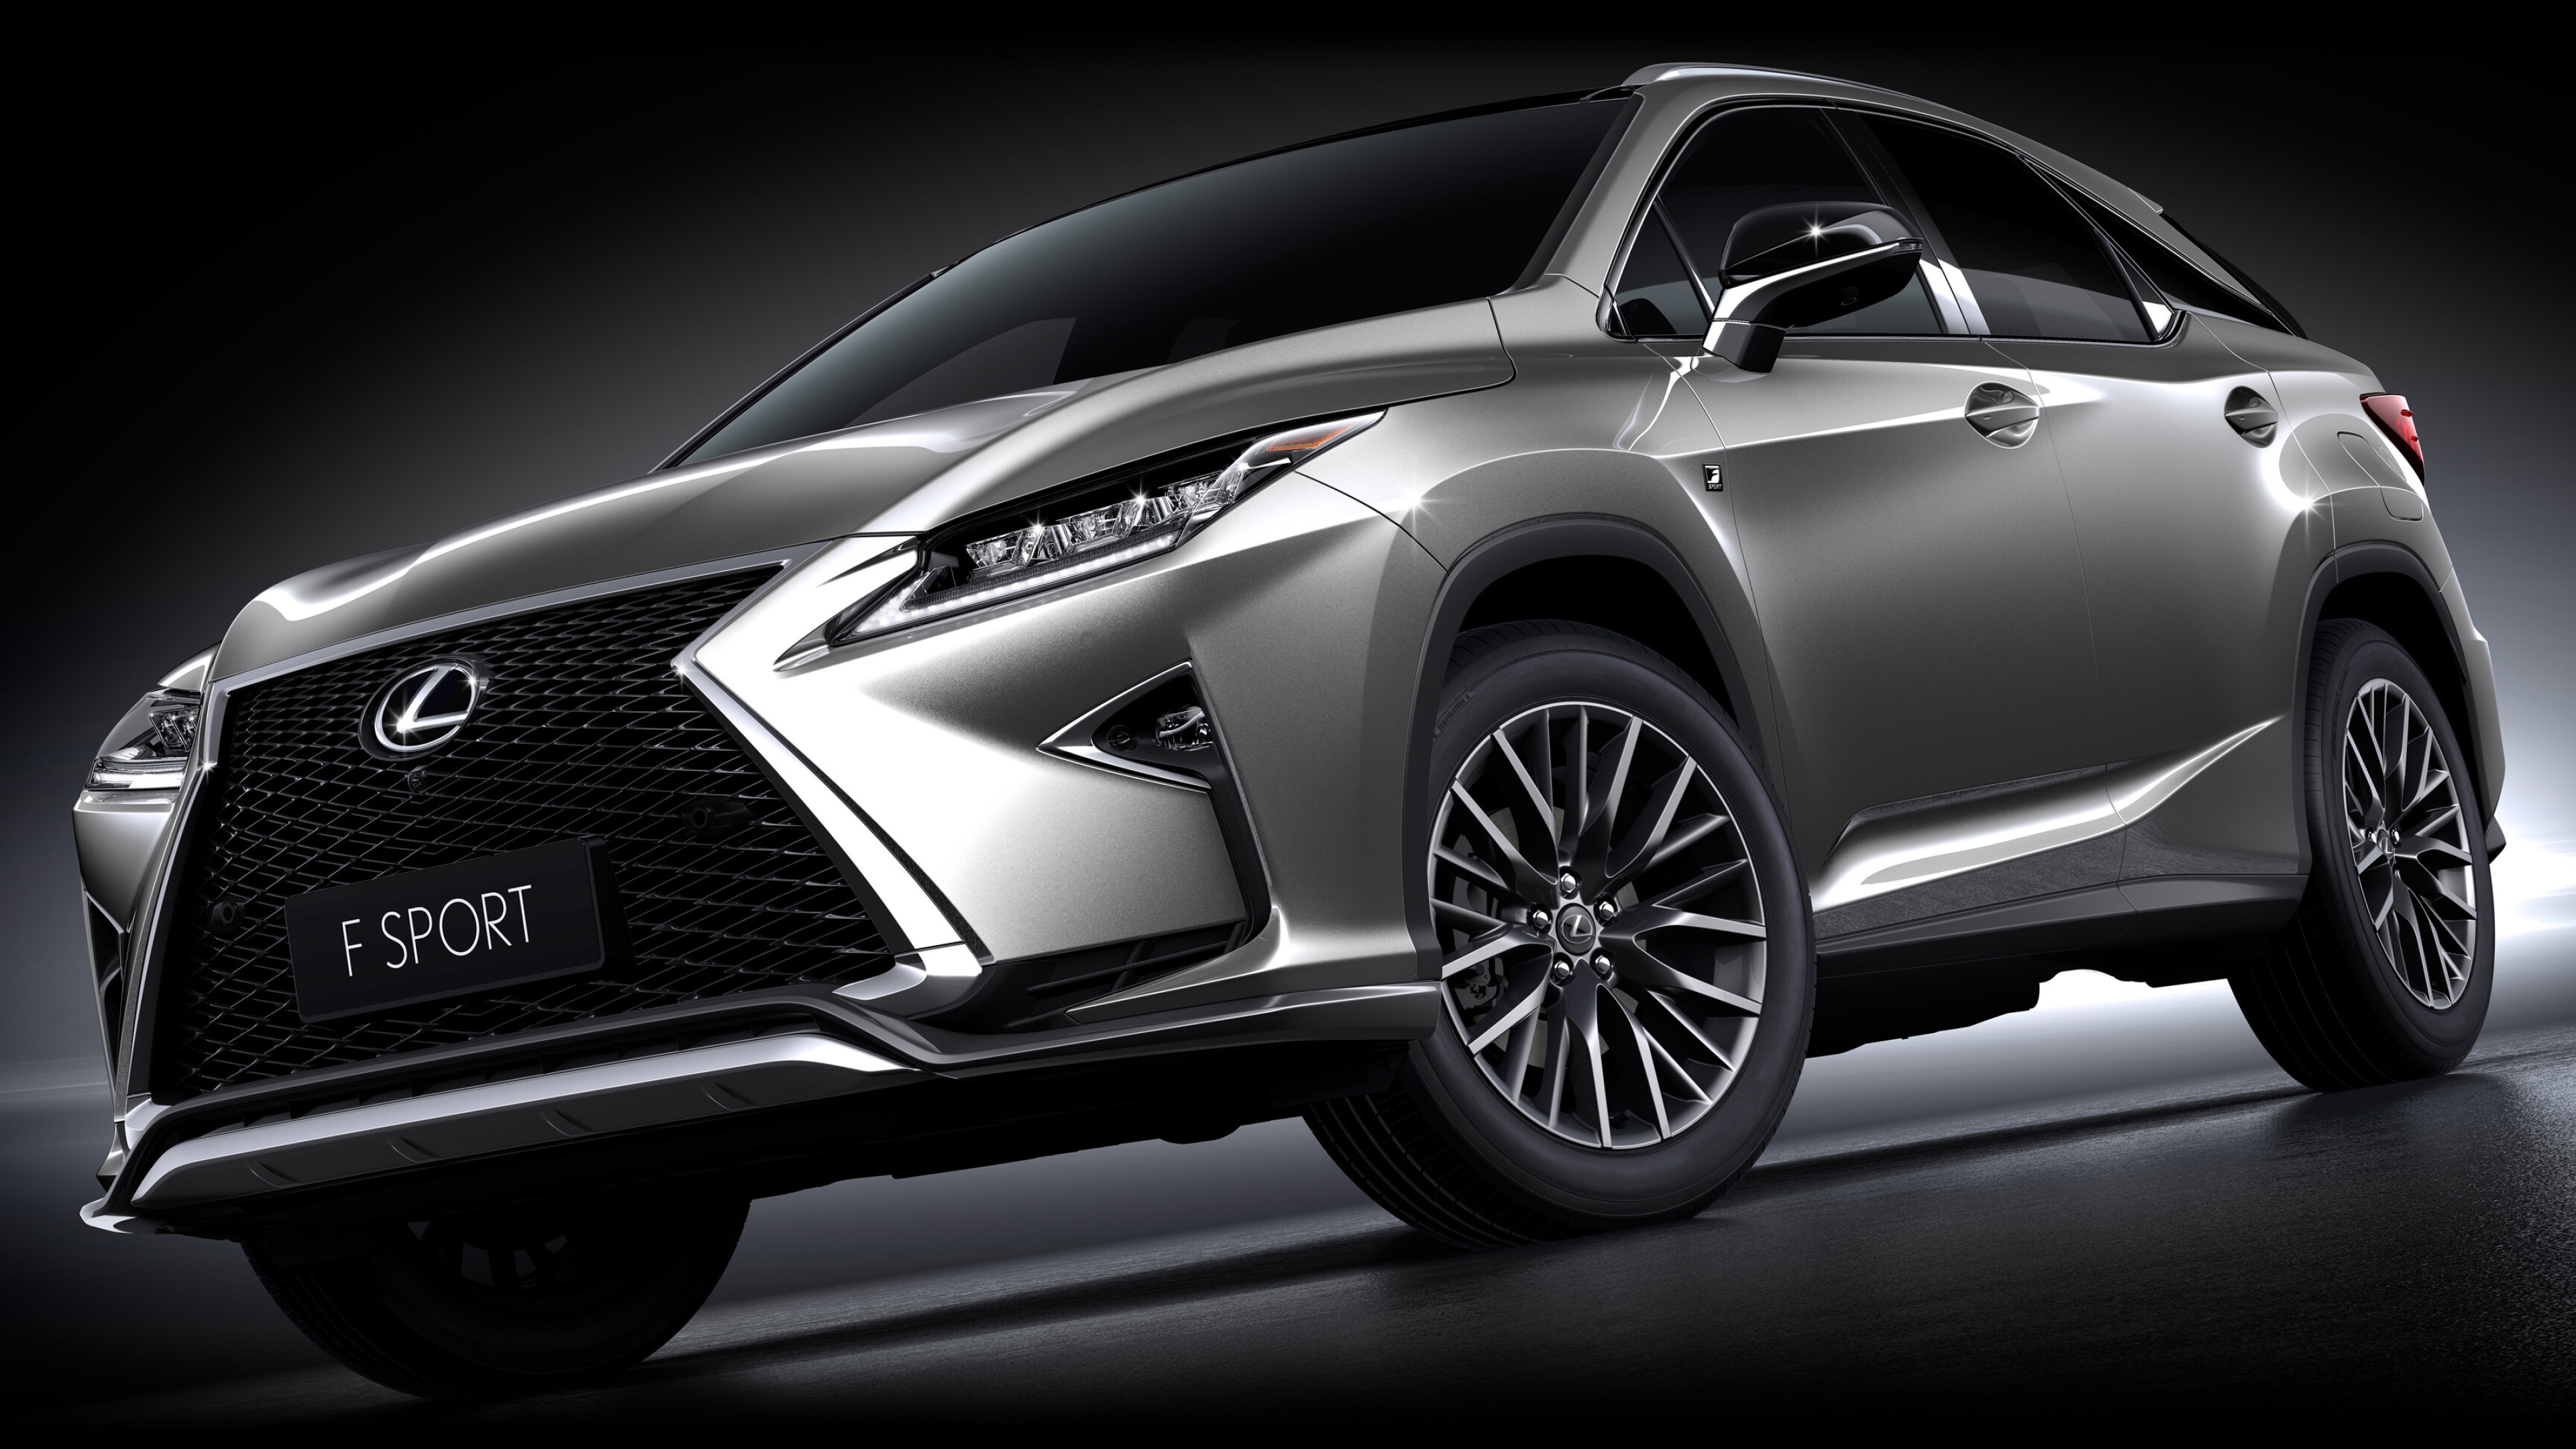 Lexus: Ranked among the 10 largest Japanese global brands in market value, RX, Cars. 3840x2160 4K Wallpaper.